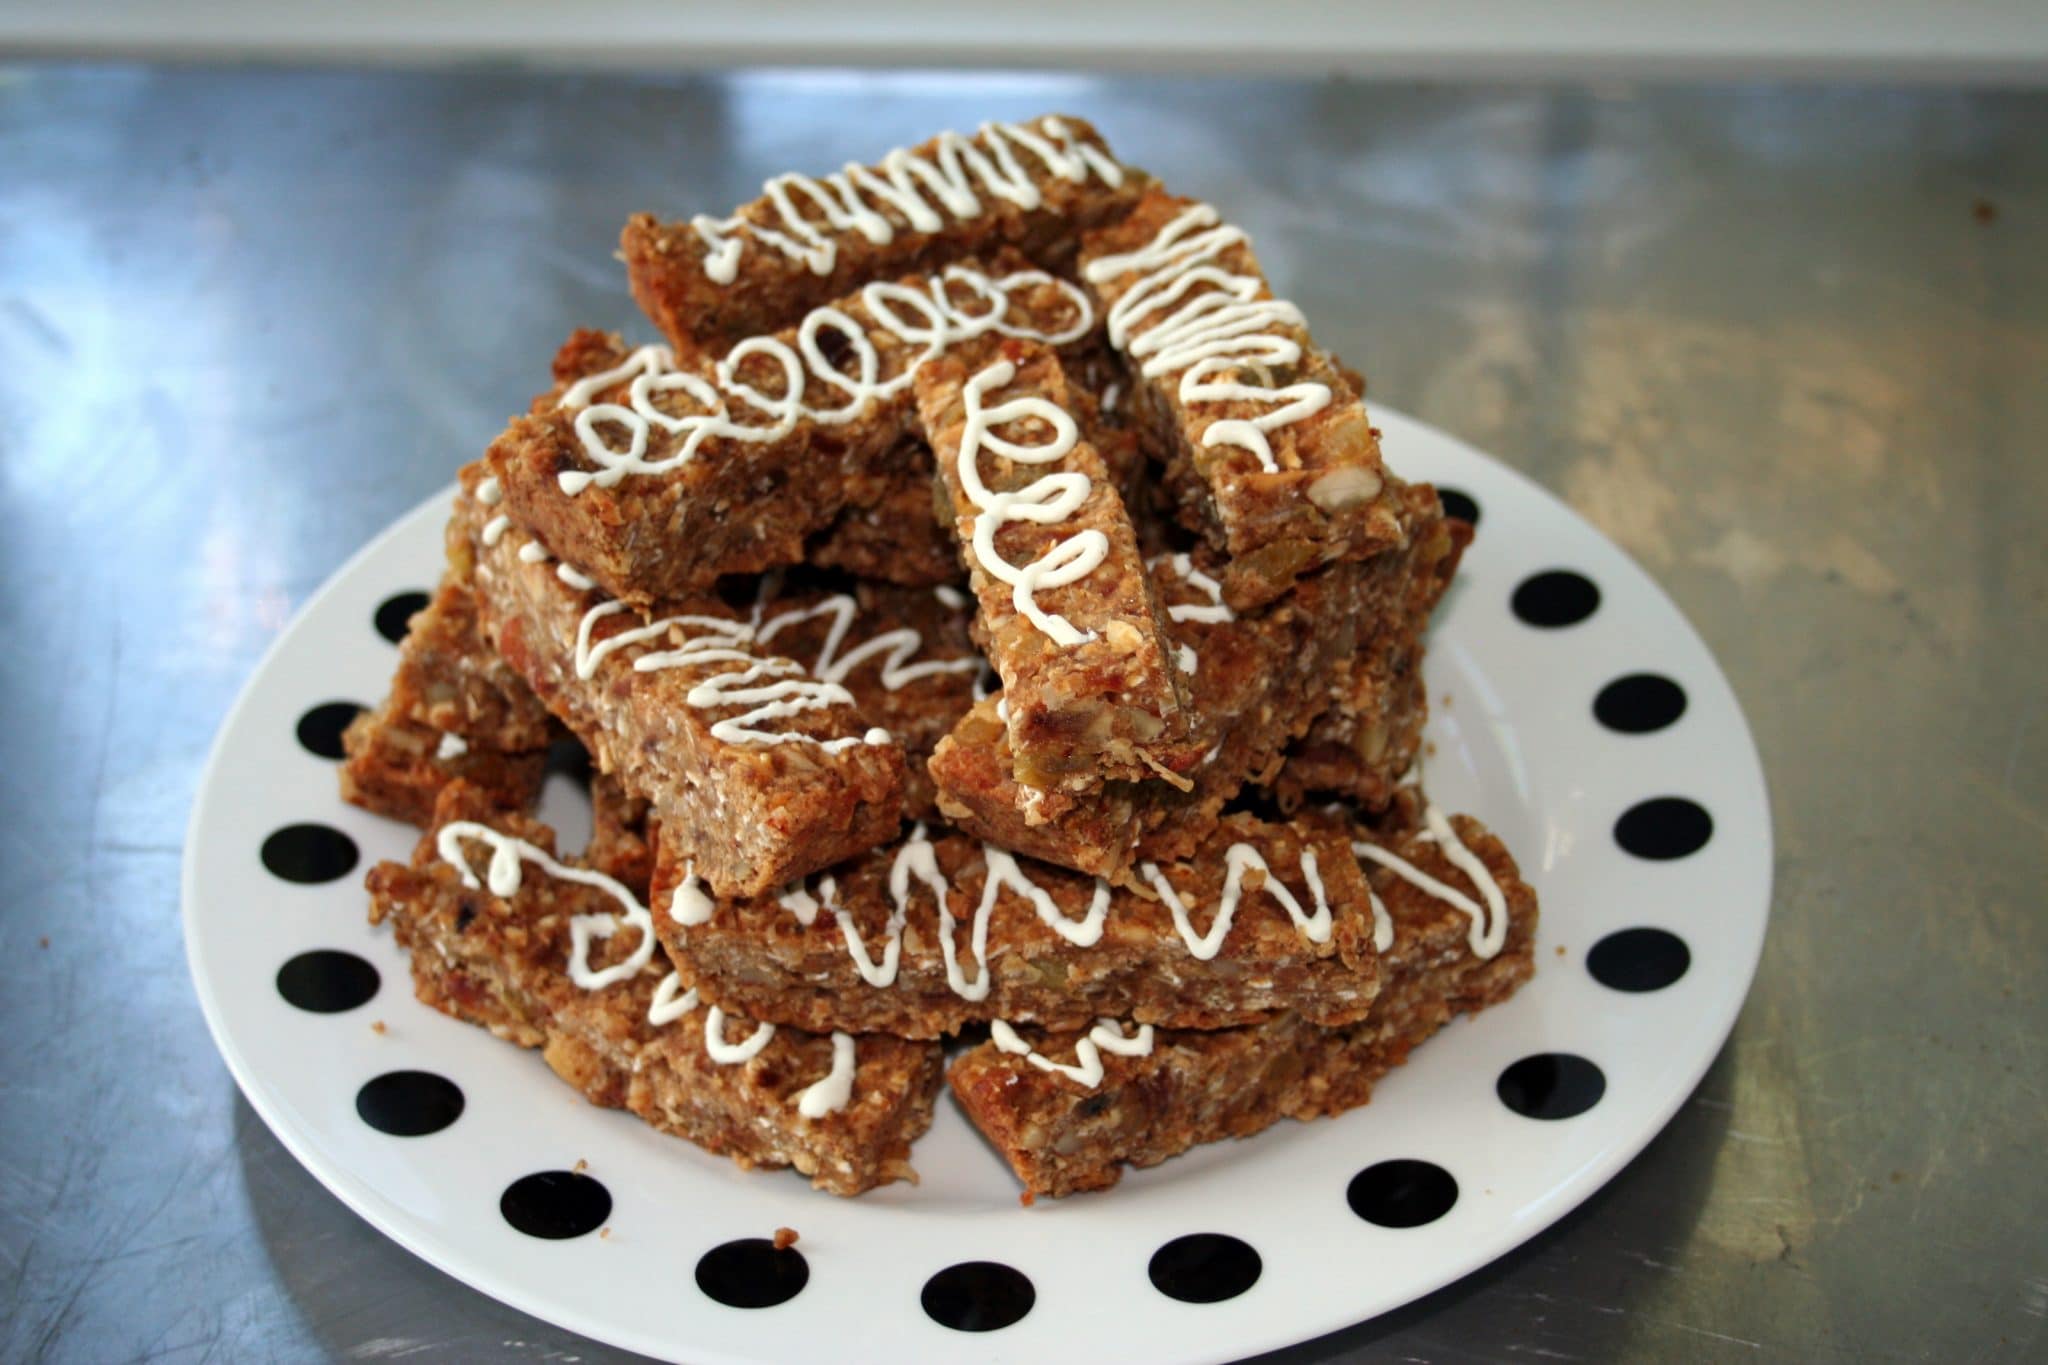 Homemade Energy Bars styled on a white plate